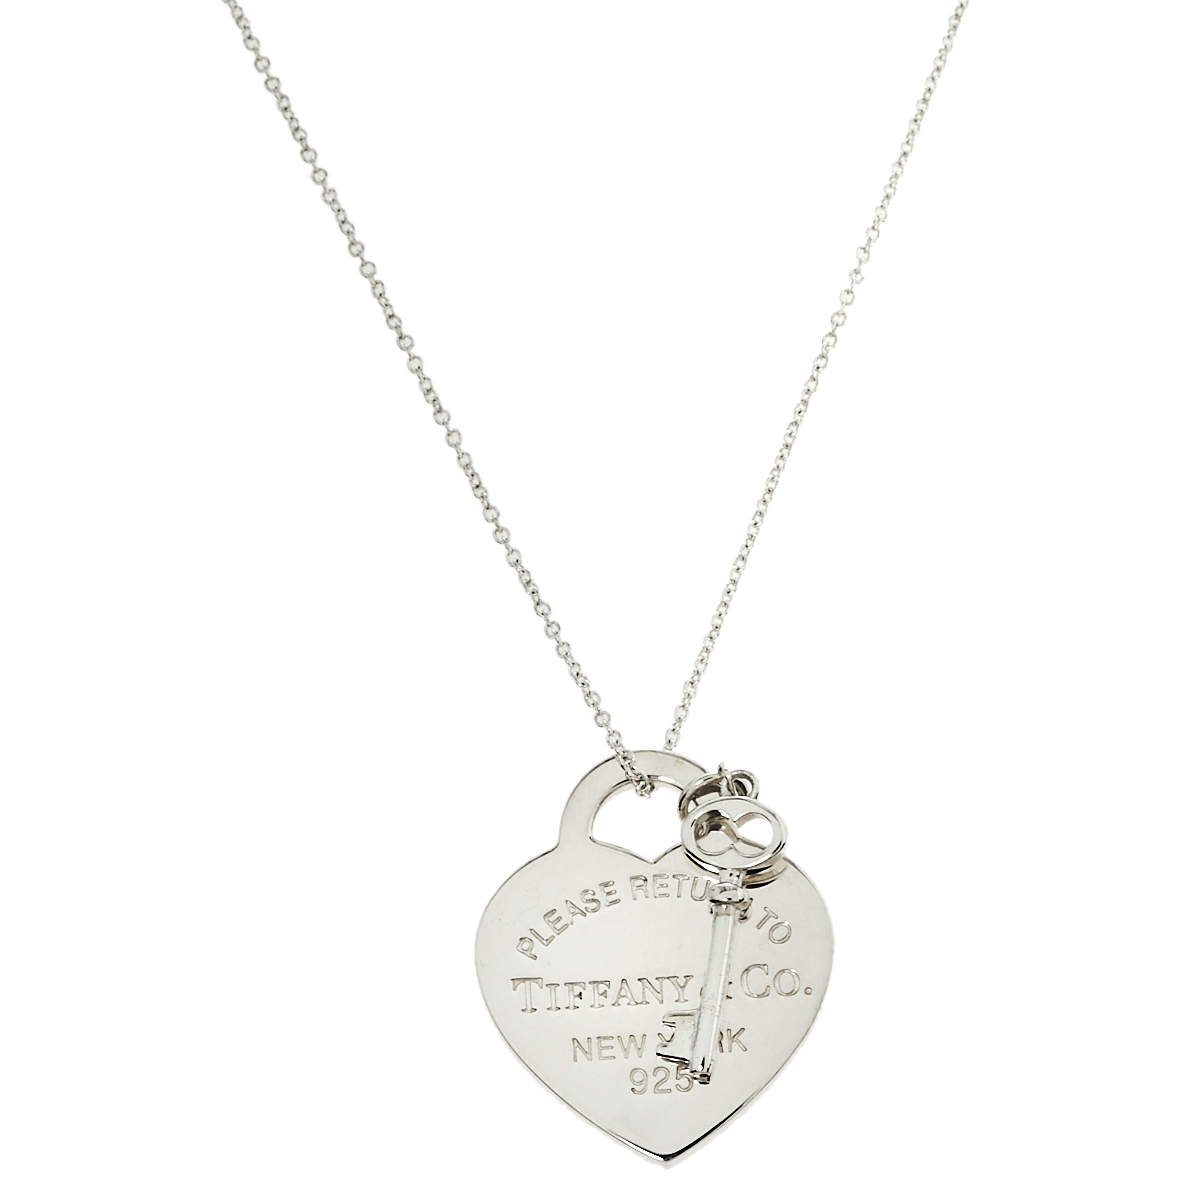 Tiffany & Co. Return To Tiffany Sterling Silver Medium Heart with Key Pendant Necklace 